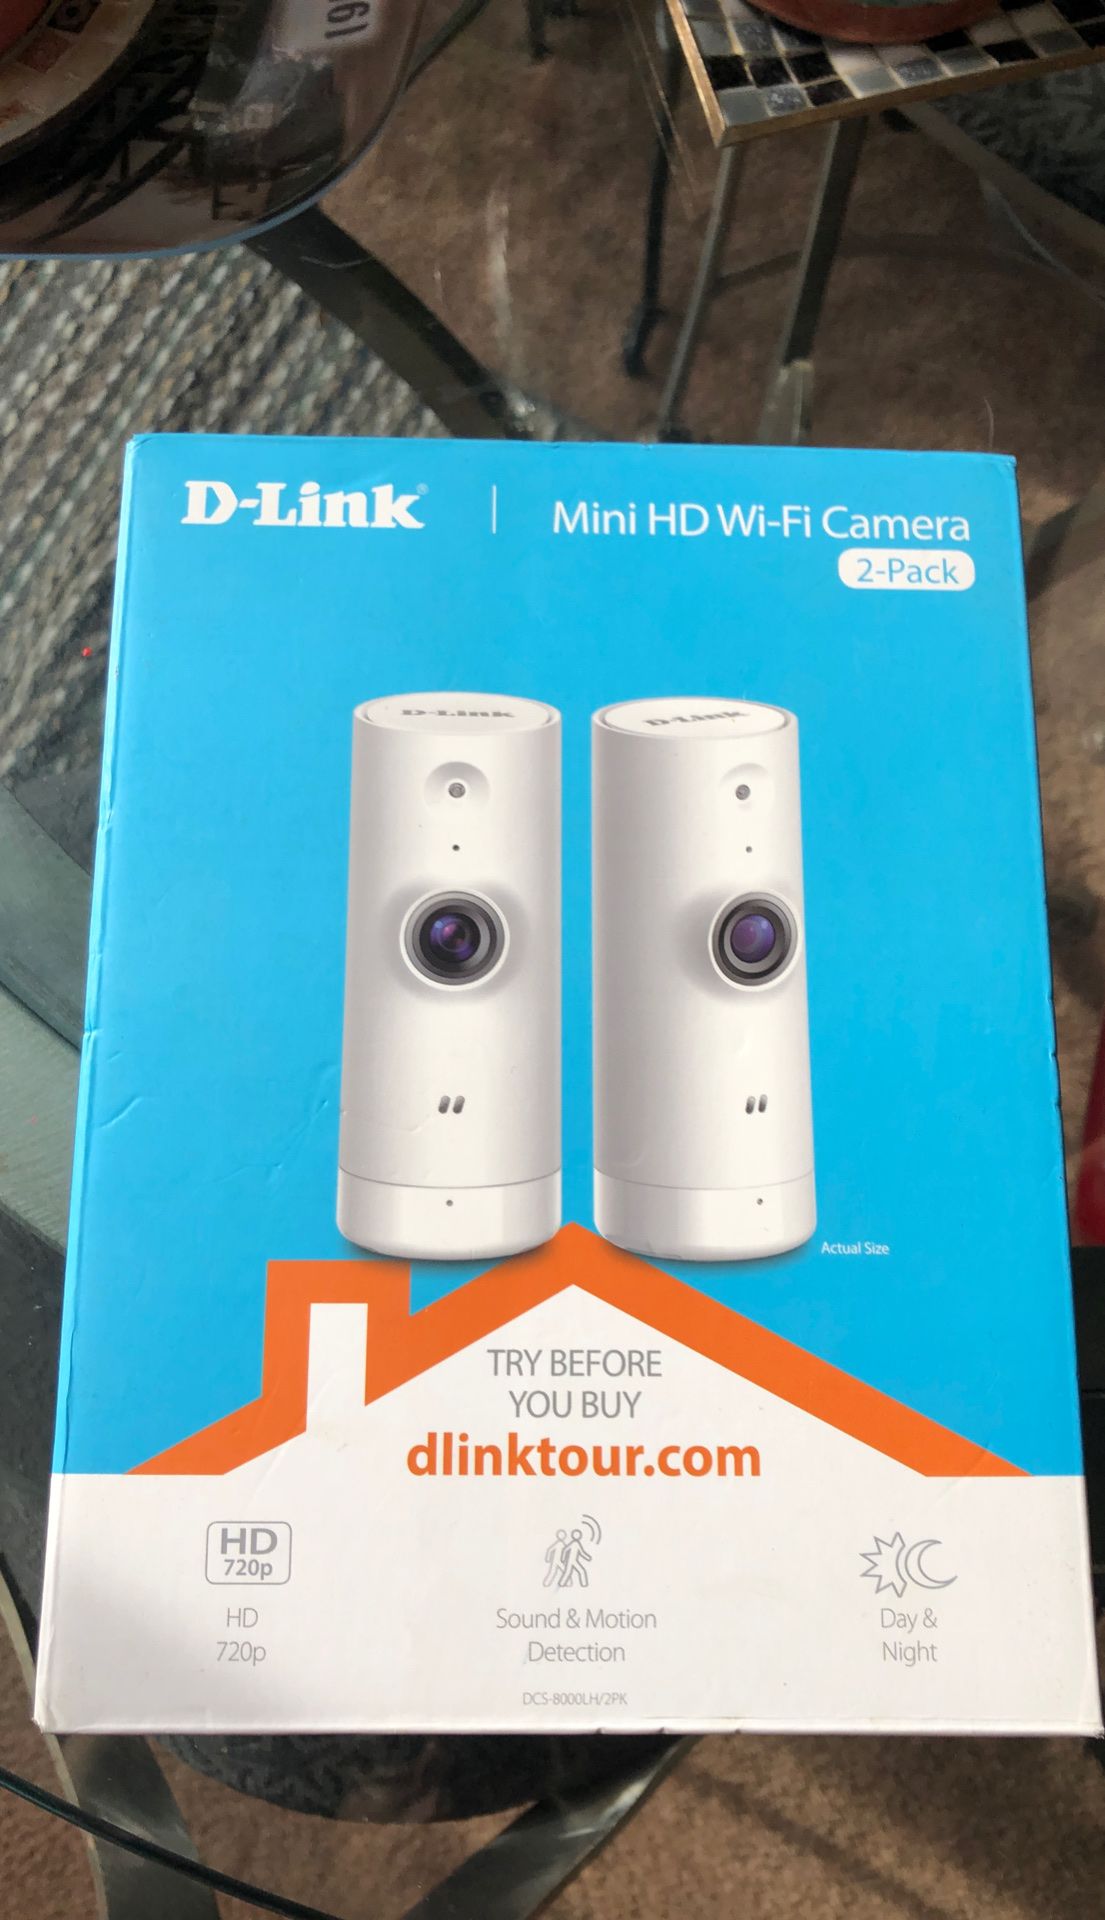 2 pack D-Link security video system Never used!